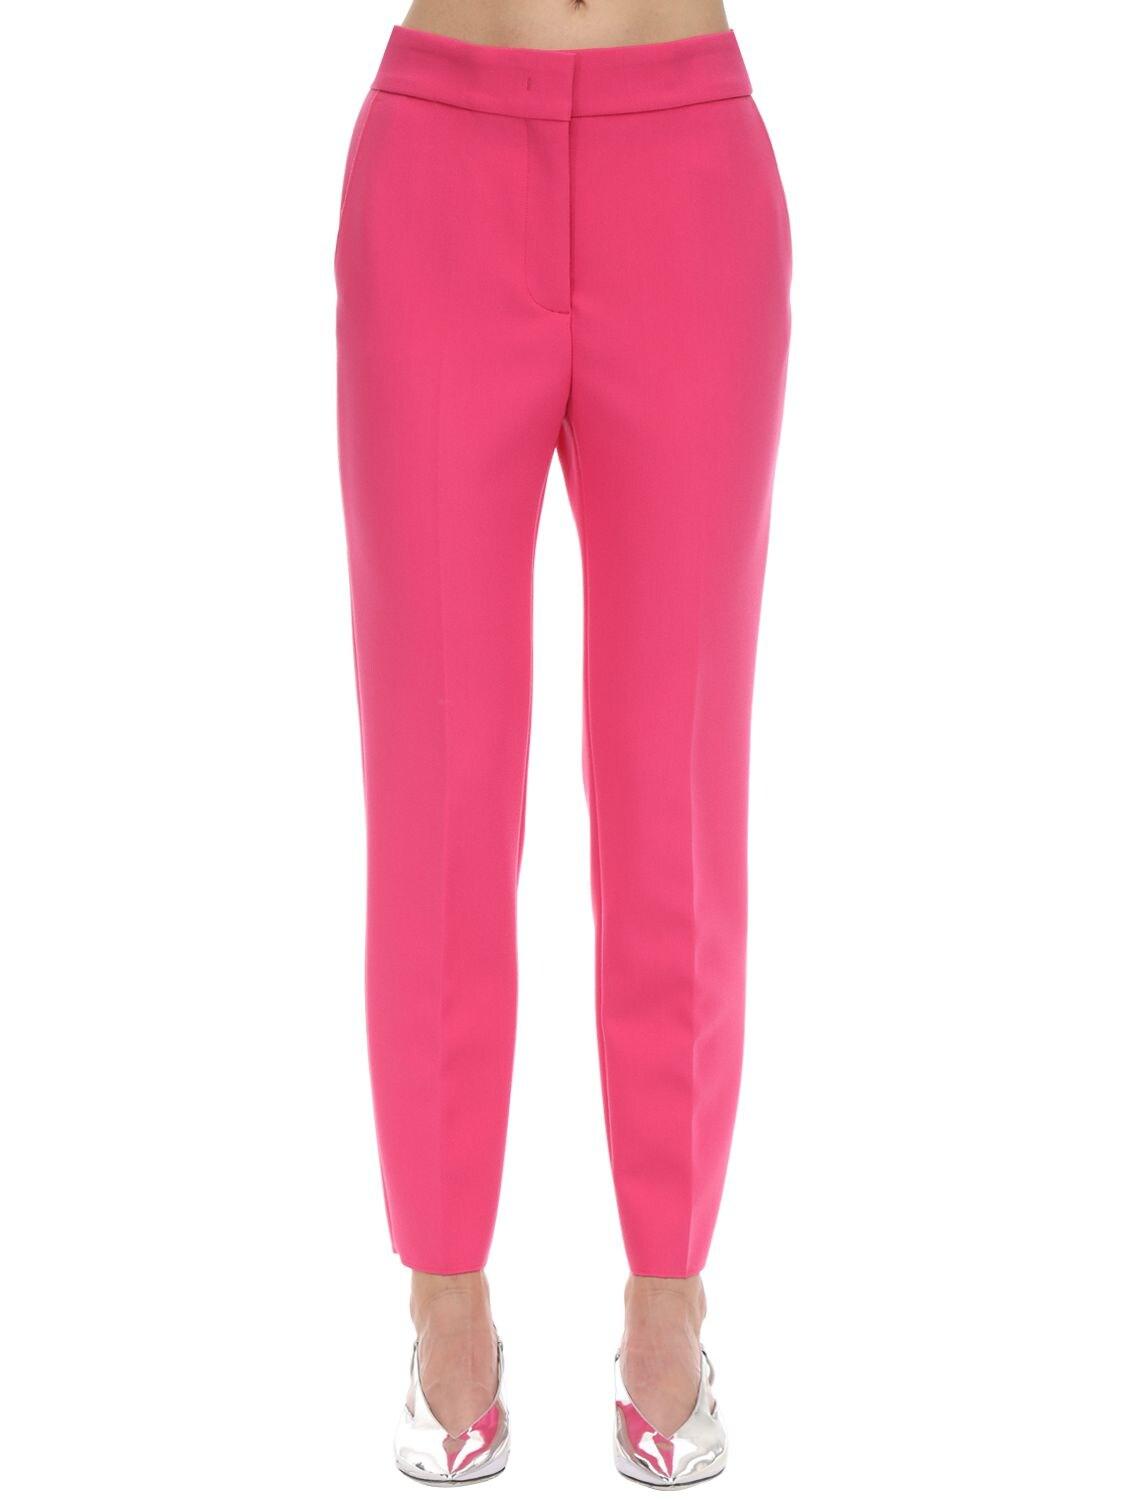 MSGM Tailored Straight Leg Double Crepe Pants in Fuchsia (Pink) - Lyst